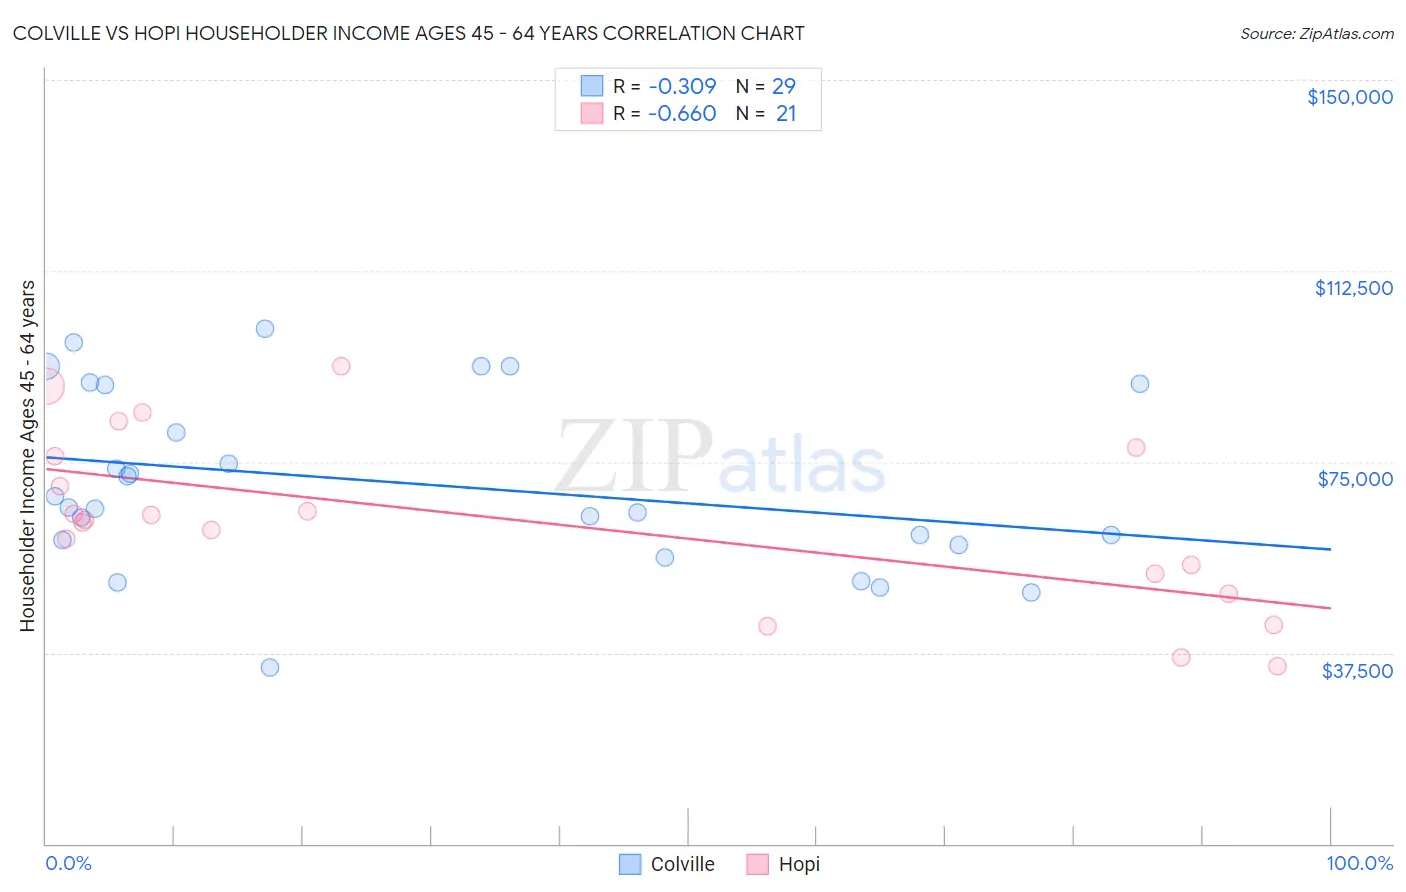 Colville vs Hopi Householder Income Ages 45 - 64 years